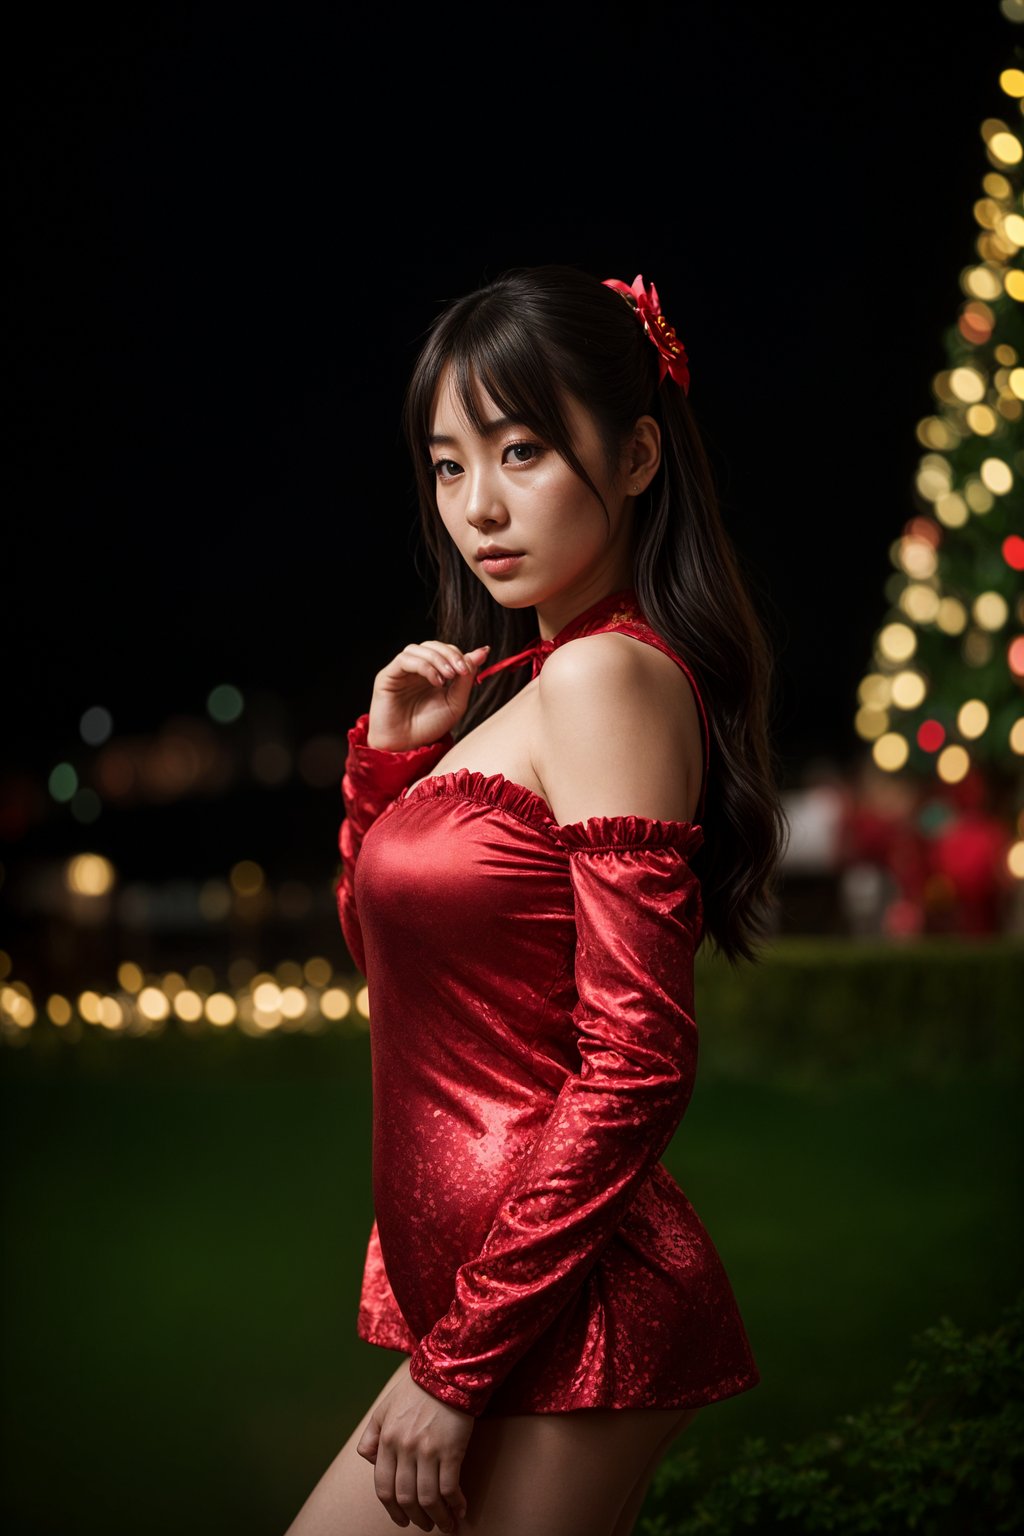 woman wearing (naughty Christmas) (sexy Christmas costume) festive outfit posing for photo, background is Christmas tree and lights